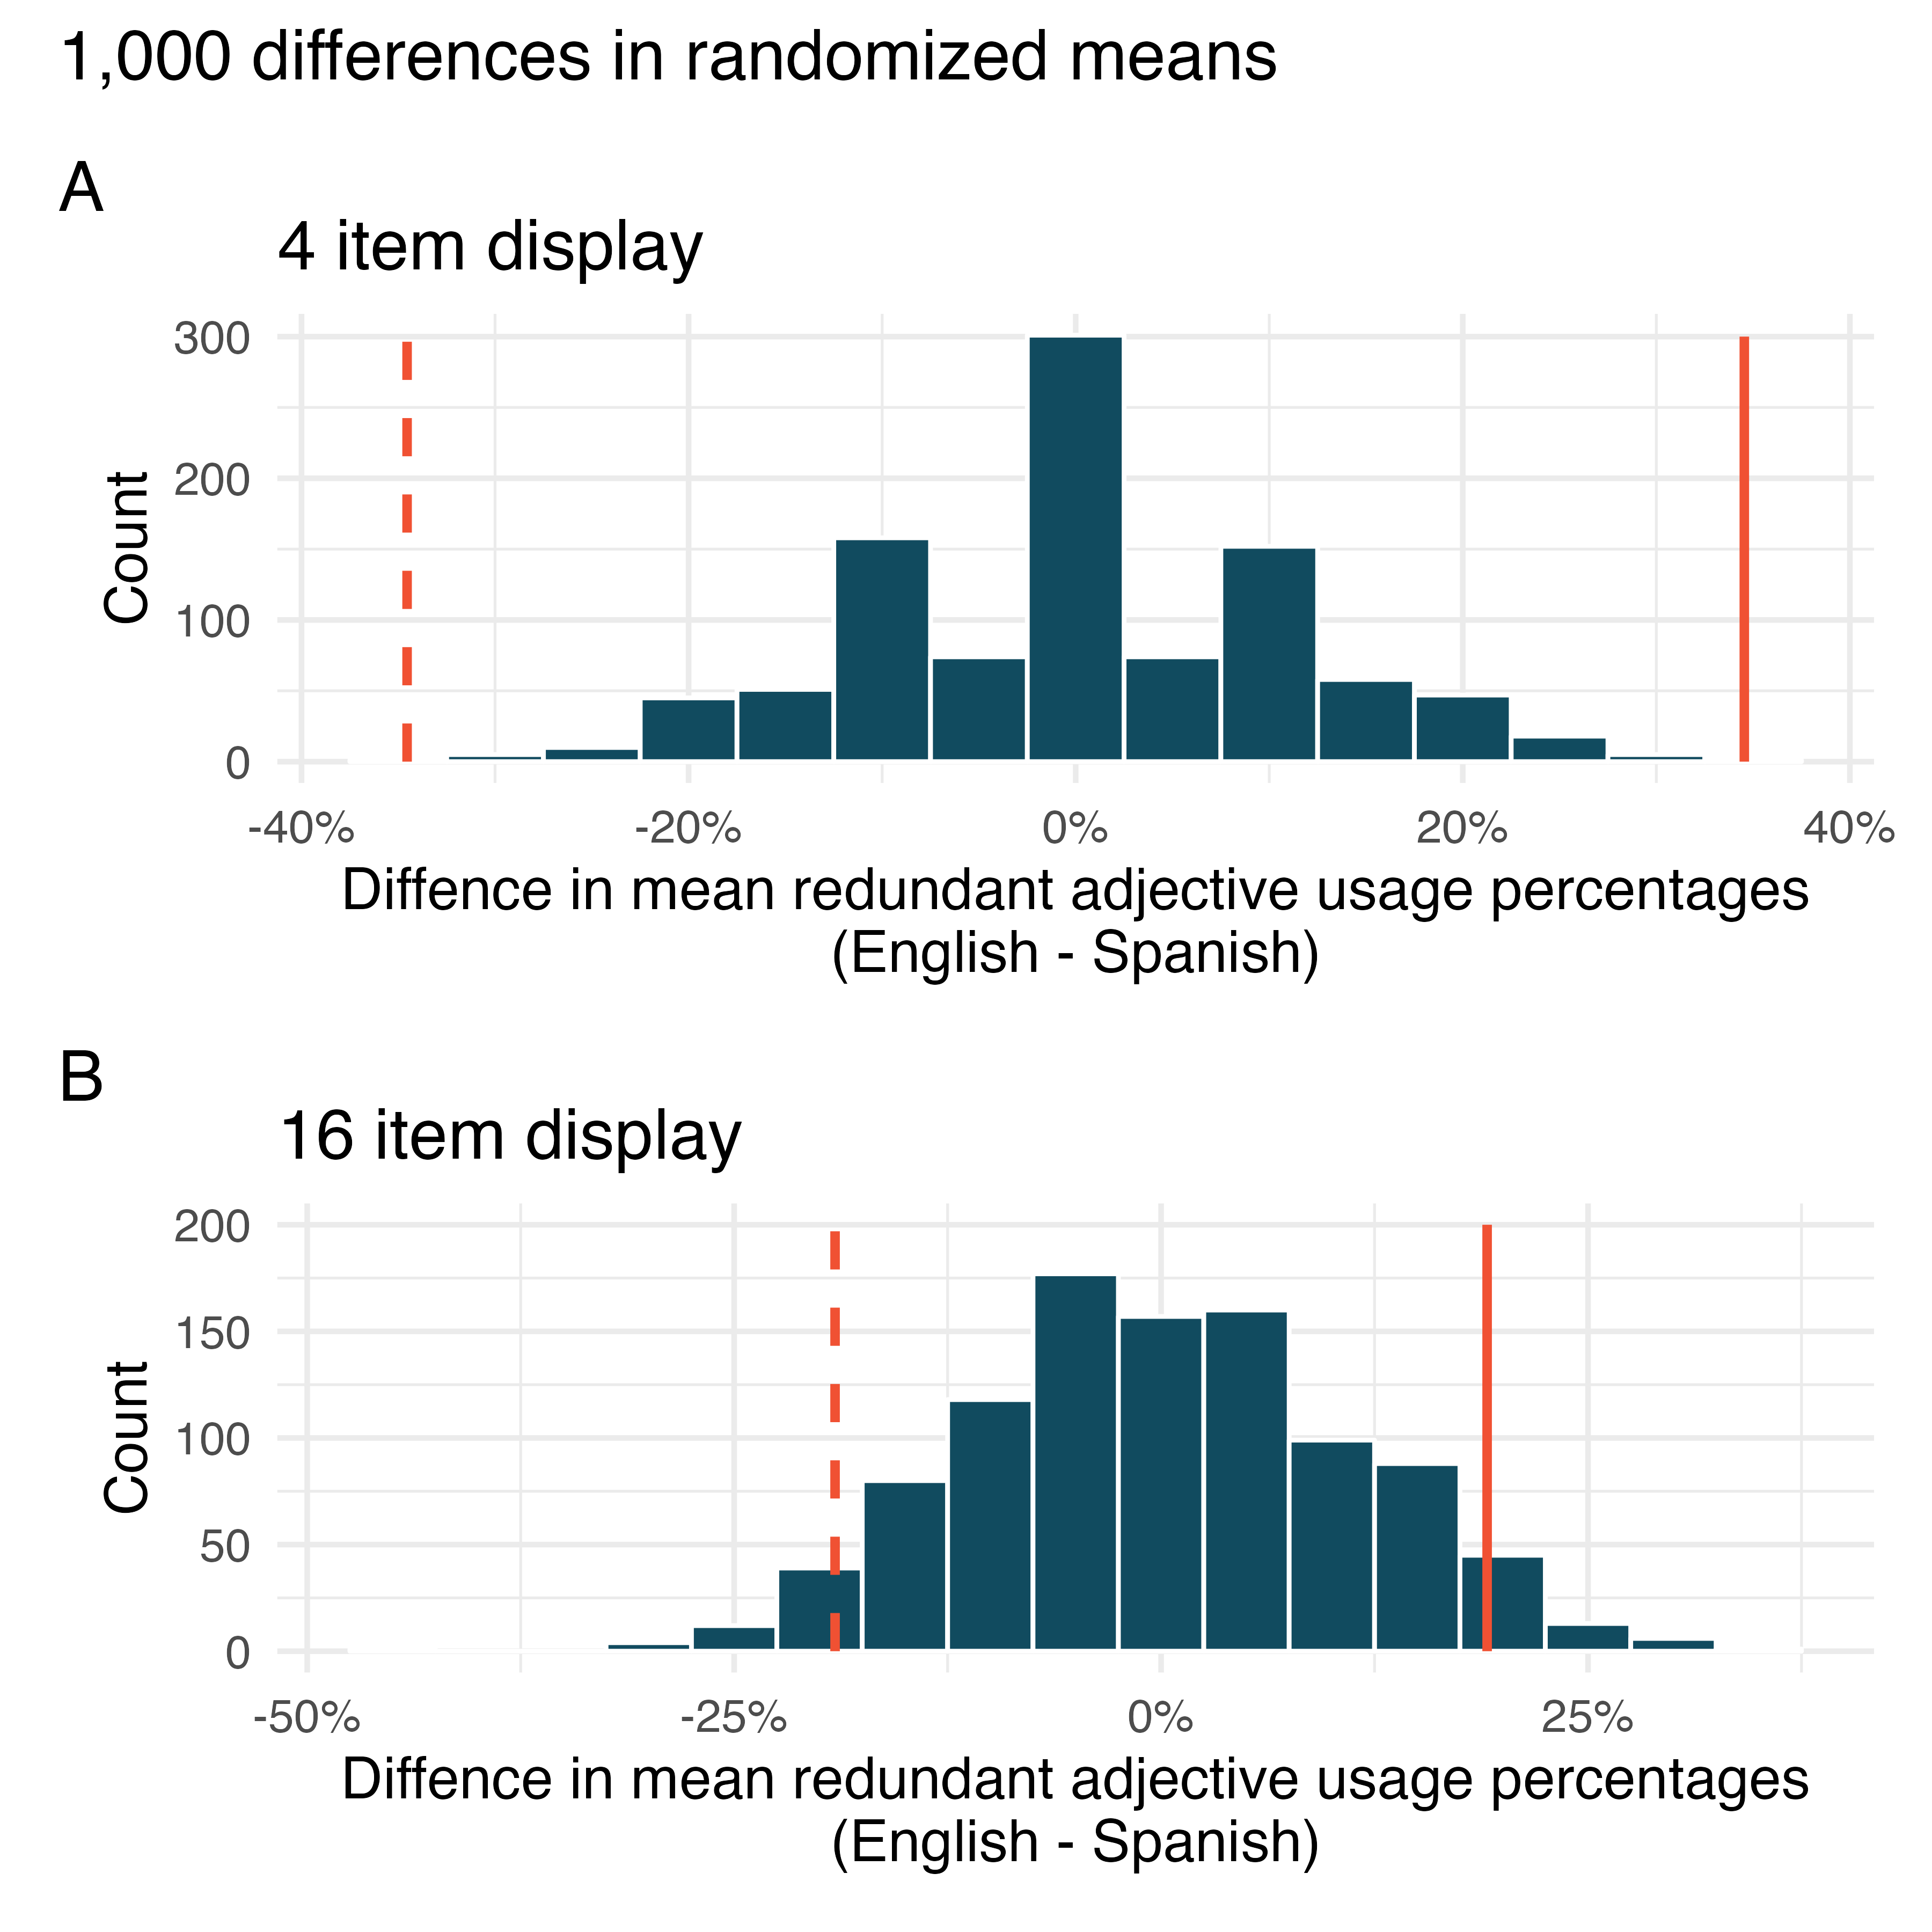 Distributions of 1,000 differences in randomized means of redundant adjective usage percentage between English and Spanish speakers. Plot A shows the differences in 4 item displays and Plot B shows the differences in 16 item displays. In each plot, the observed differences in the sample (solid line) as well as the differences in the other direction (dashed line) are overlaid.